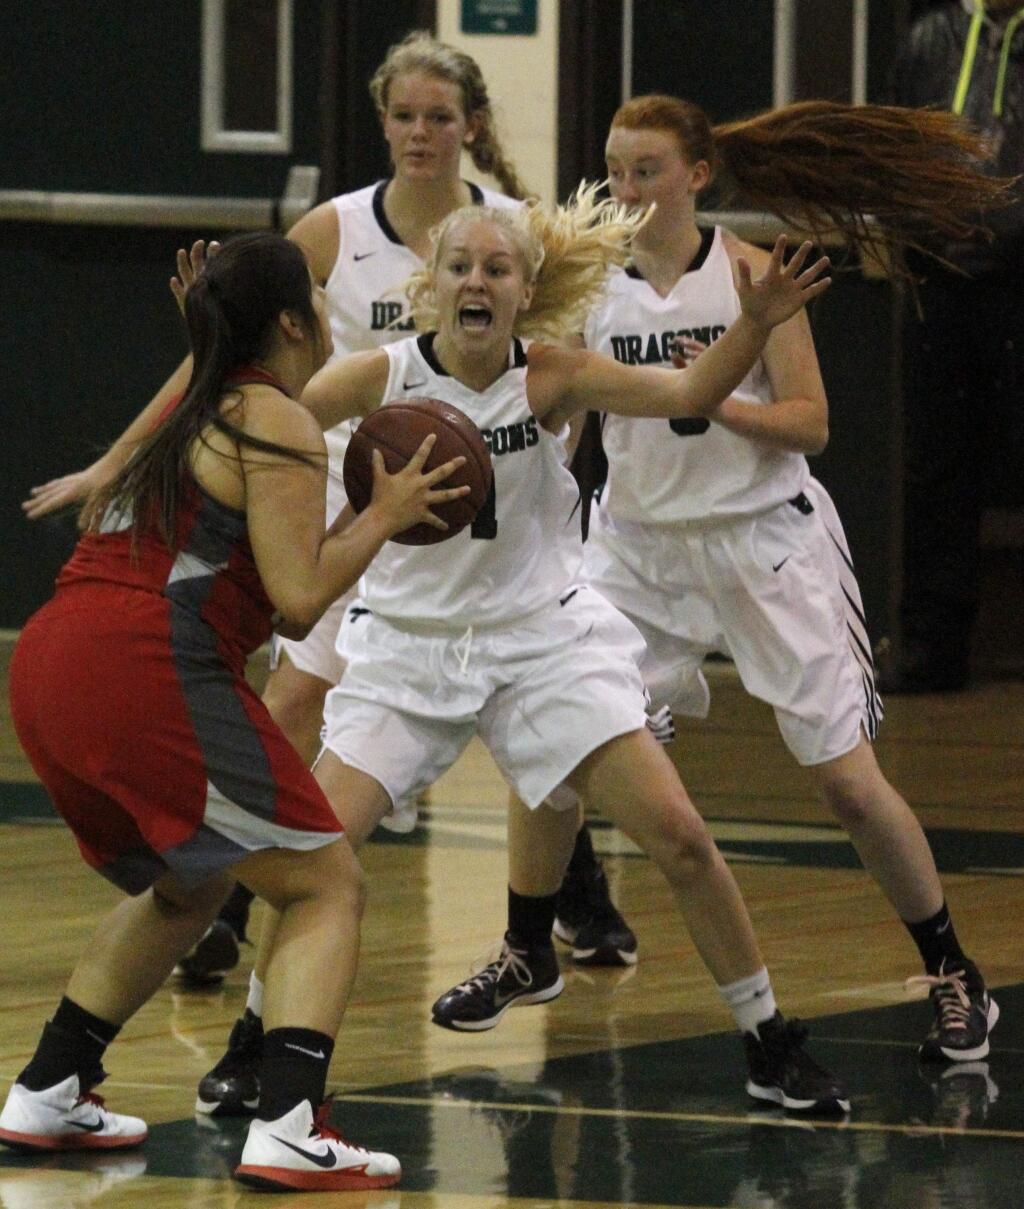 The Sonoma Valley High Lady Dragons basketball team is poised to repeat as SCL champs in the coming season. Their non-league games begin this week. (Index-Tribune file photo)